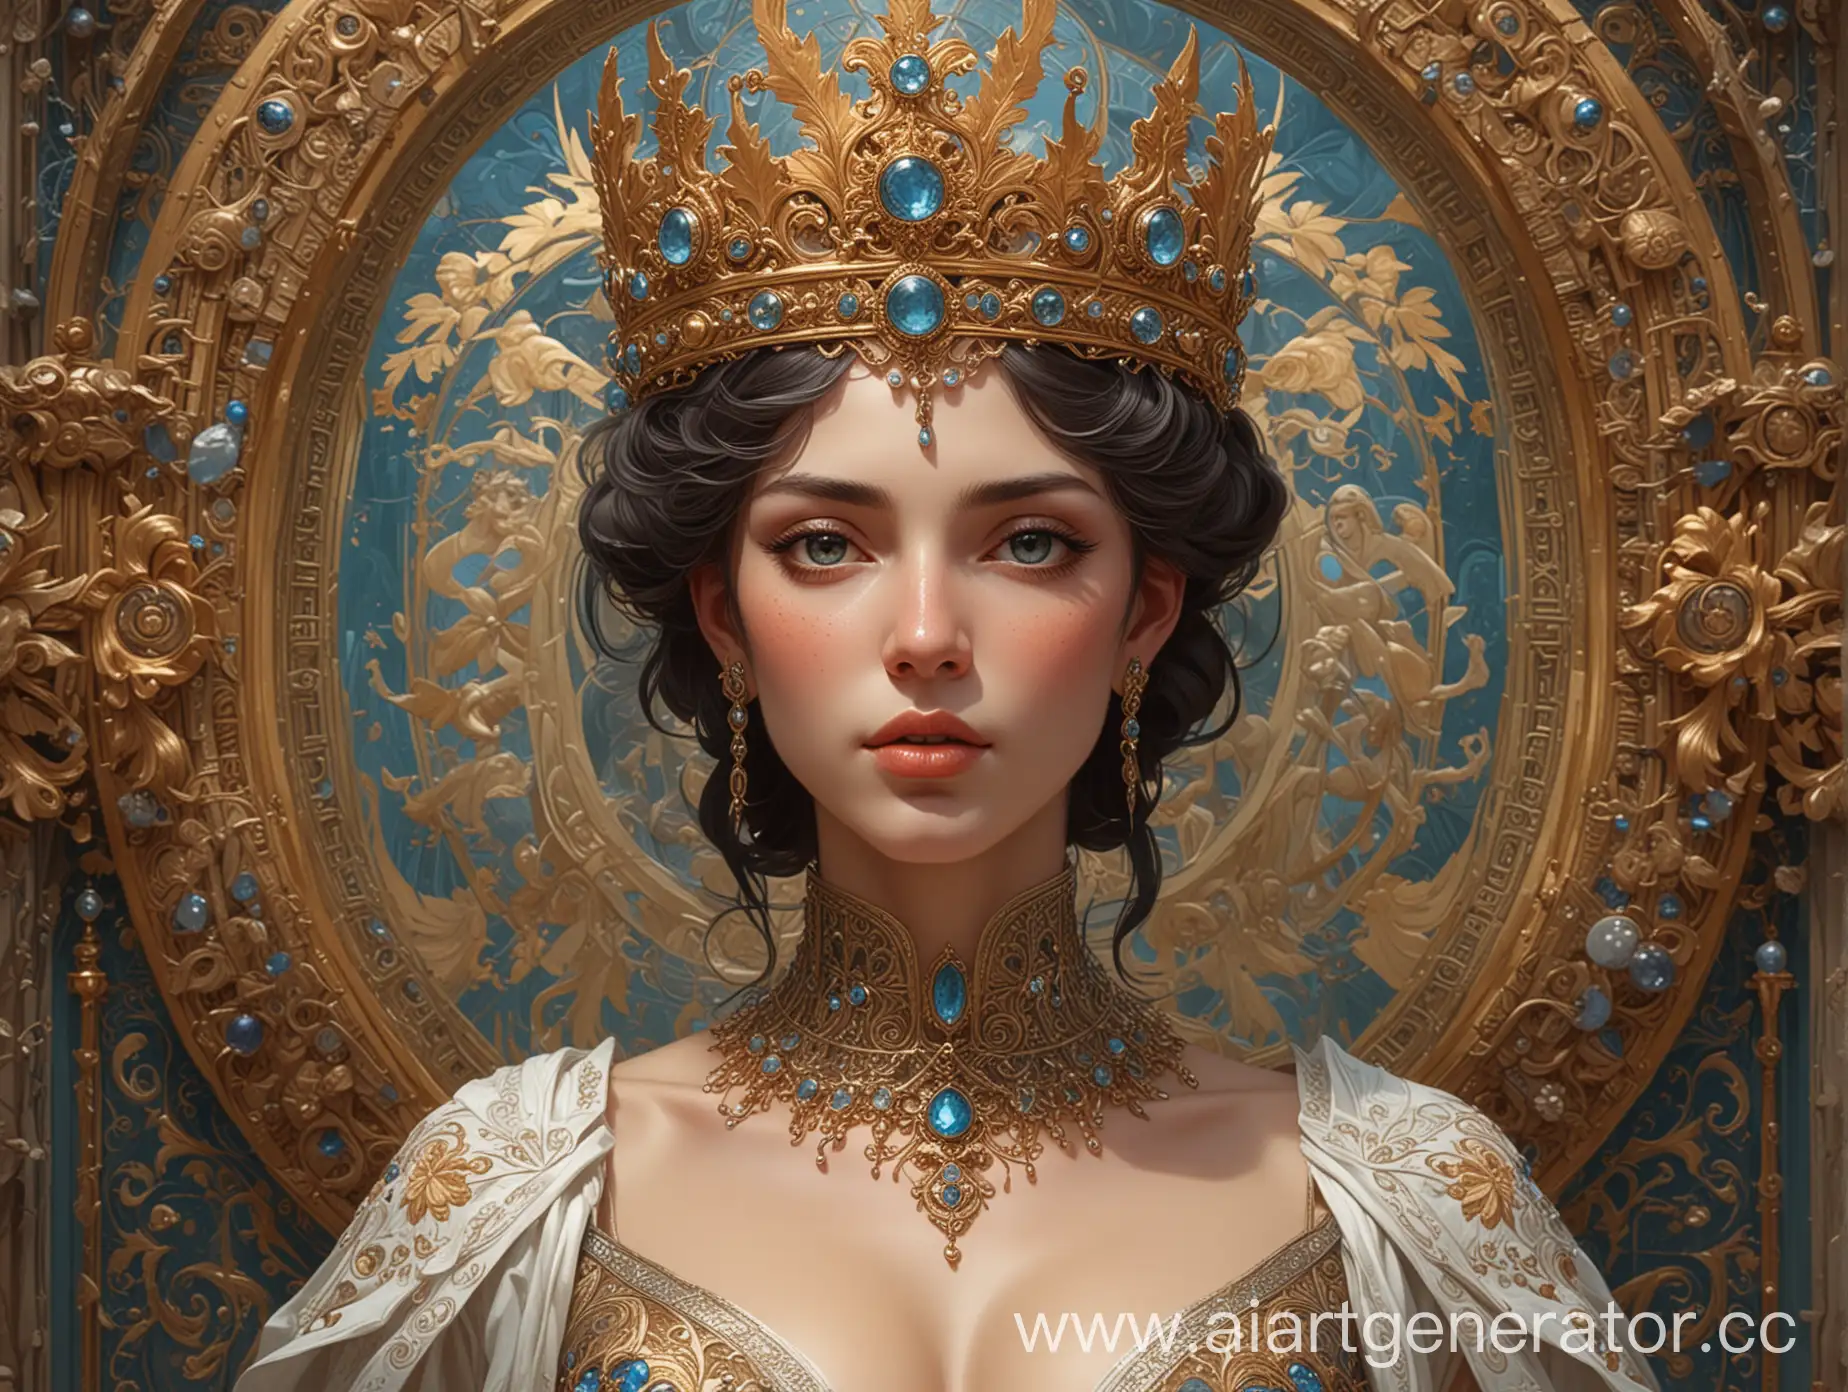 Fantasy-Art-Goddess-of-Travel-with-Intricate-Crown-by-Galen-Dara